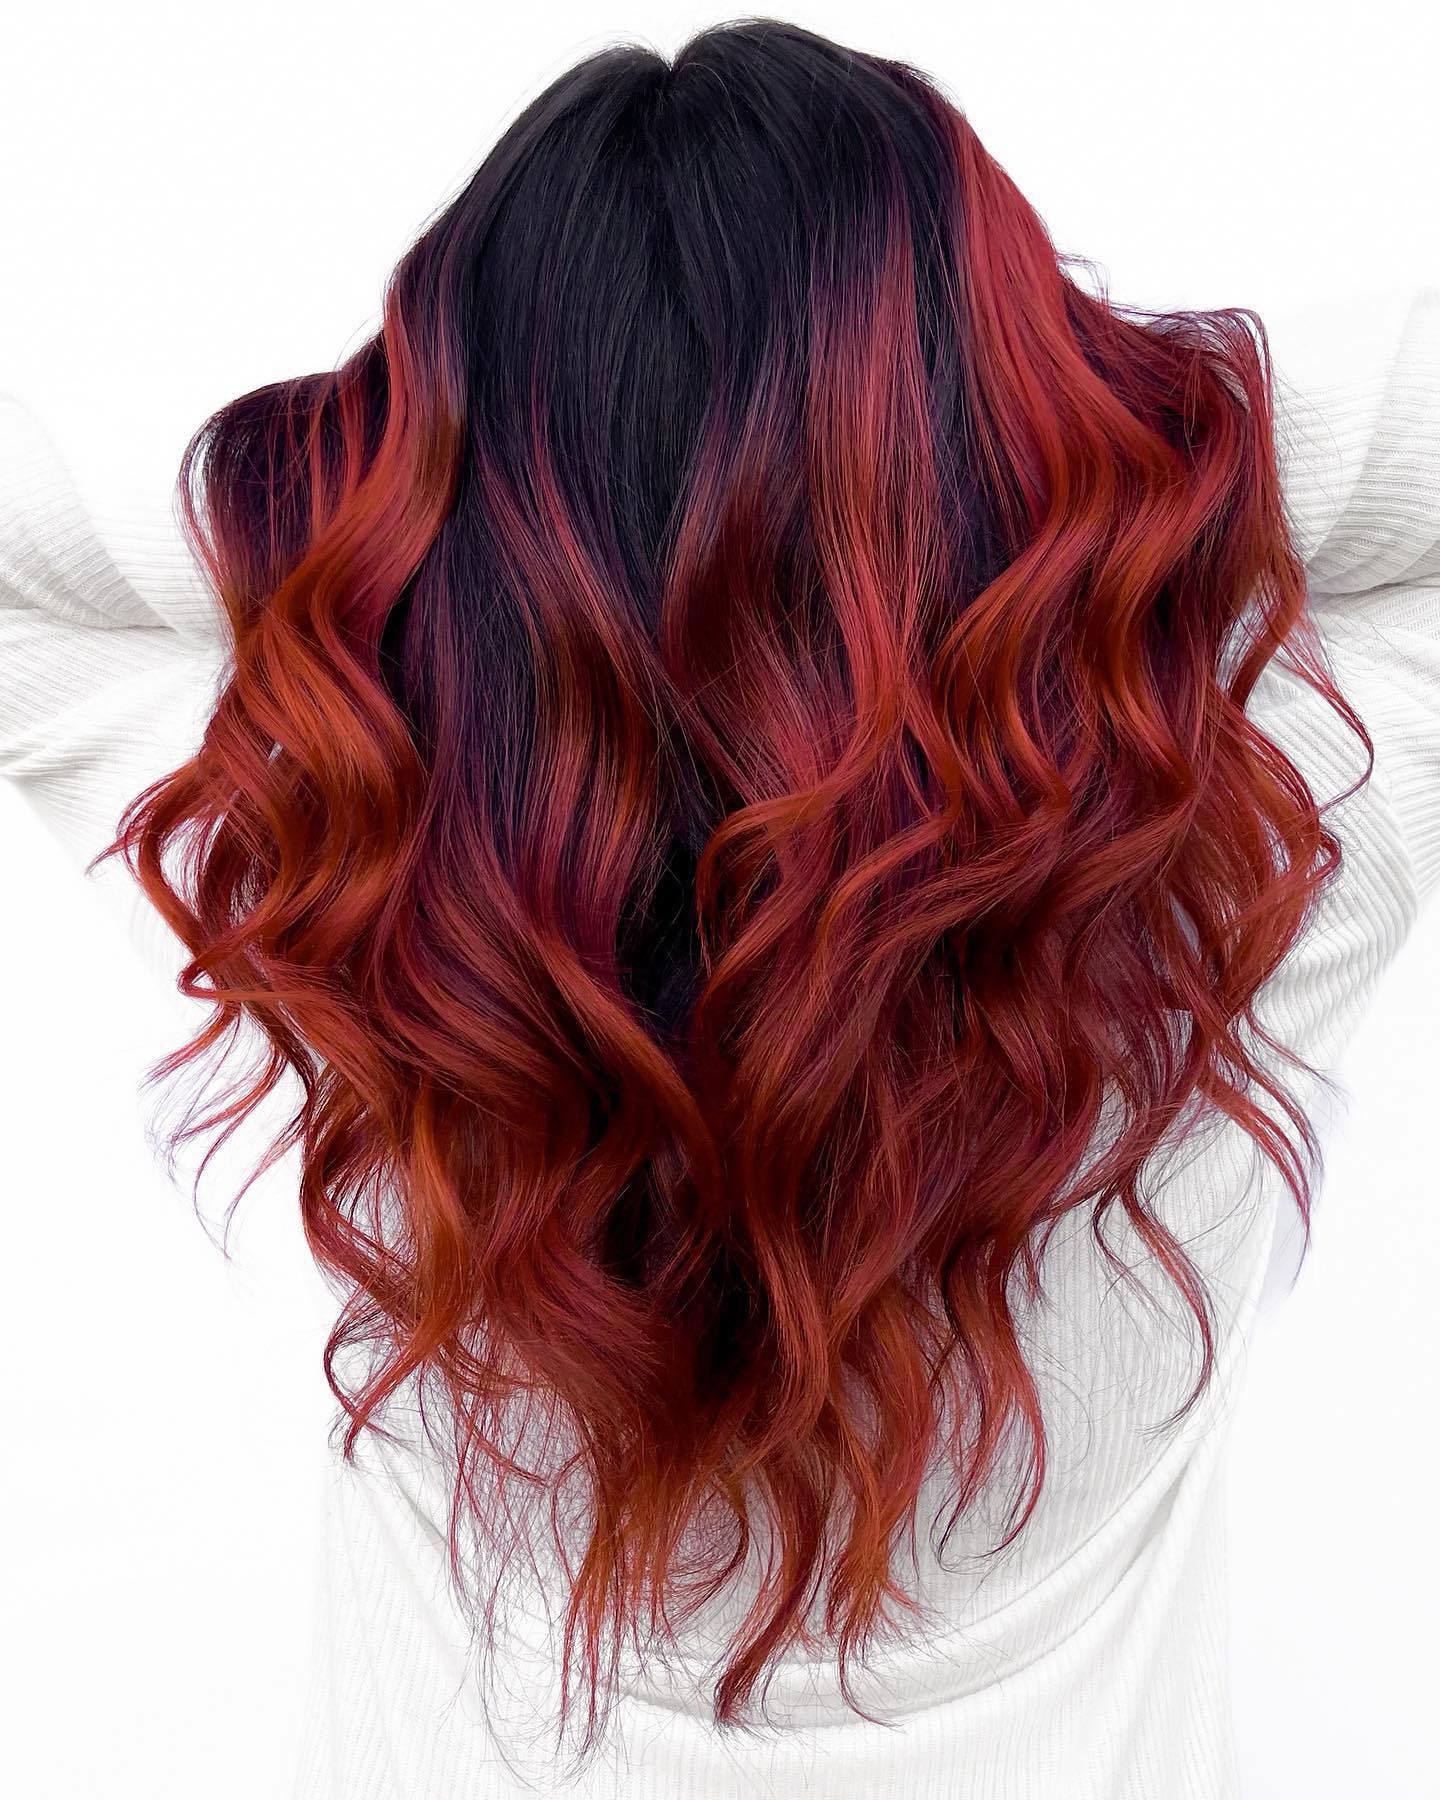 26 Rich Red Hair Colors for Your Fall Mood Board